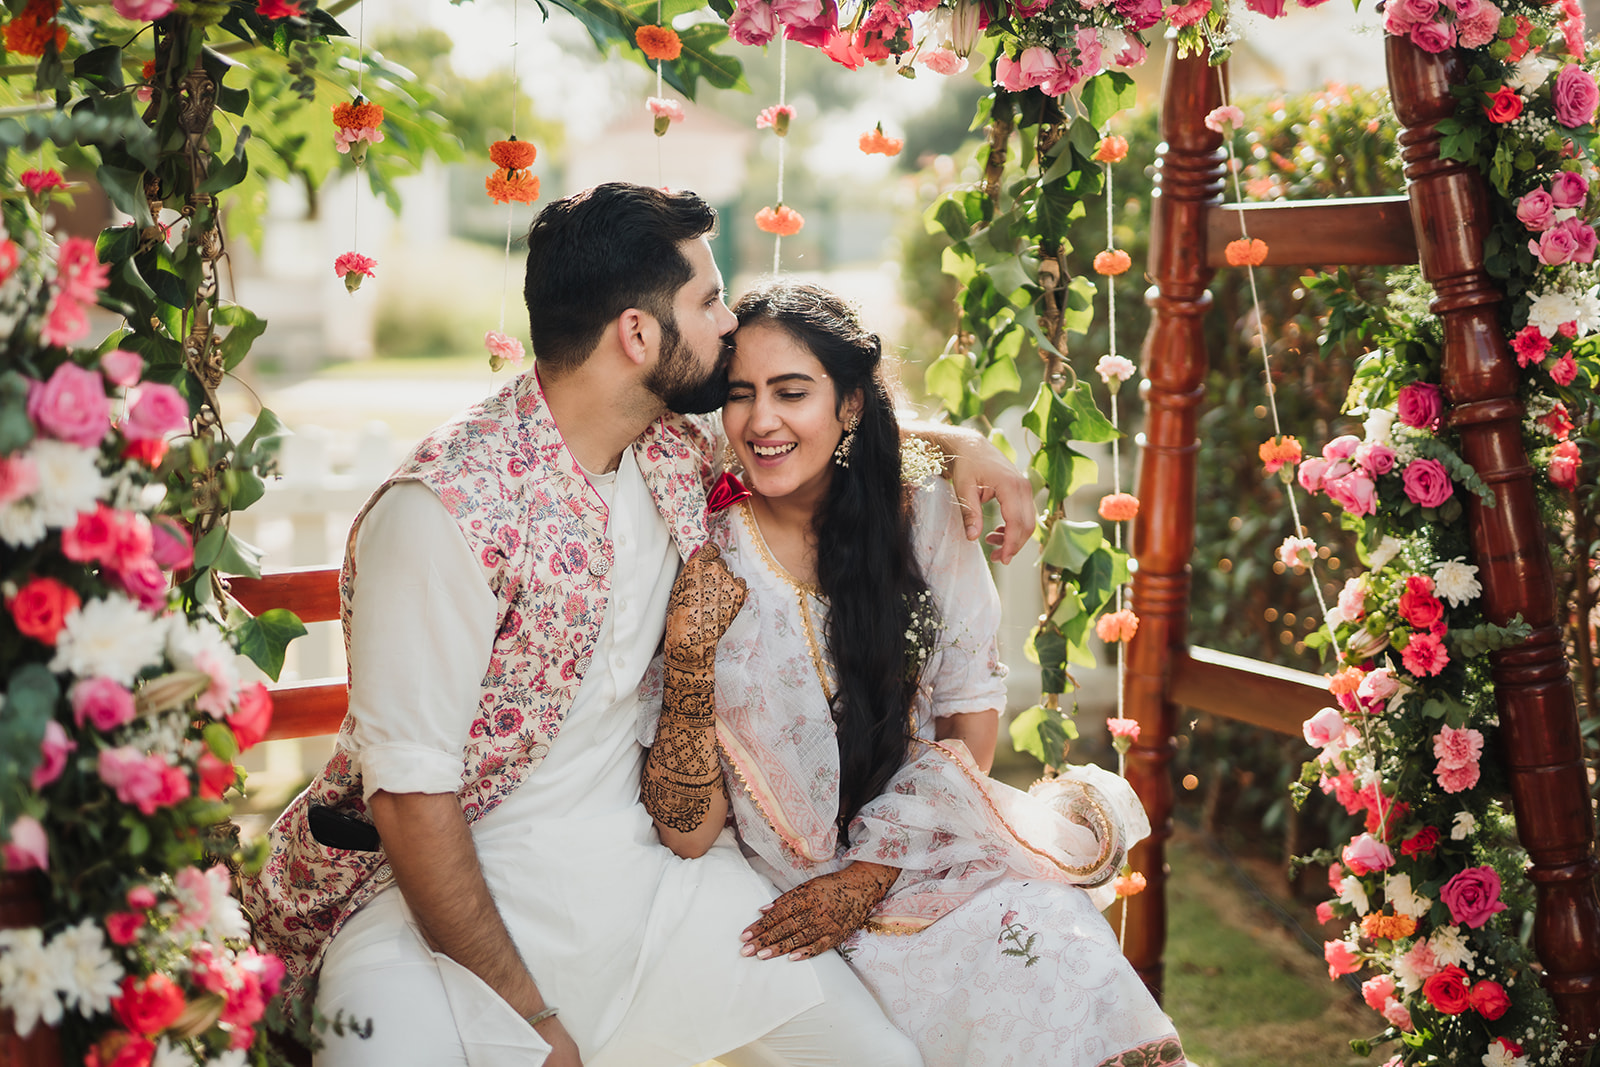 Affectionate kiss: Capturing the groom's loving gesture as he plants a kiss on the bride's forehead